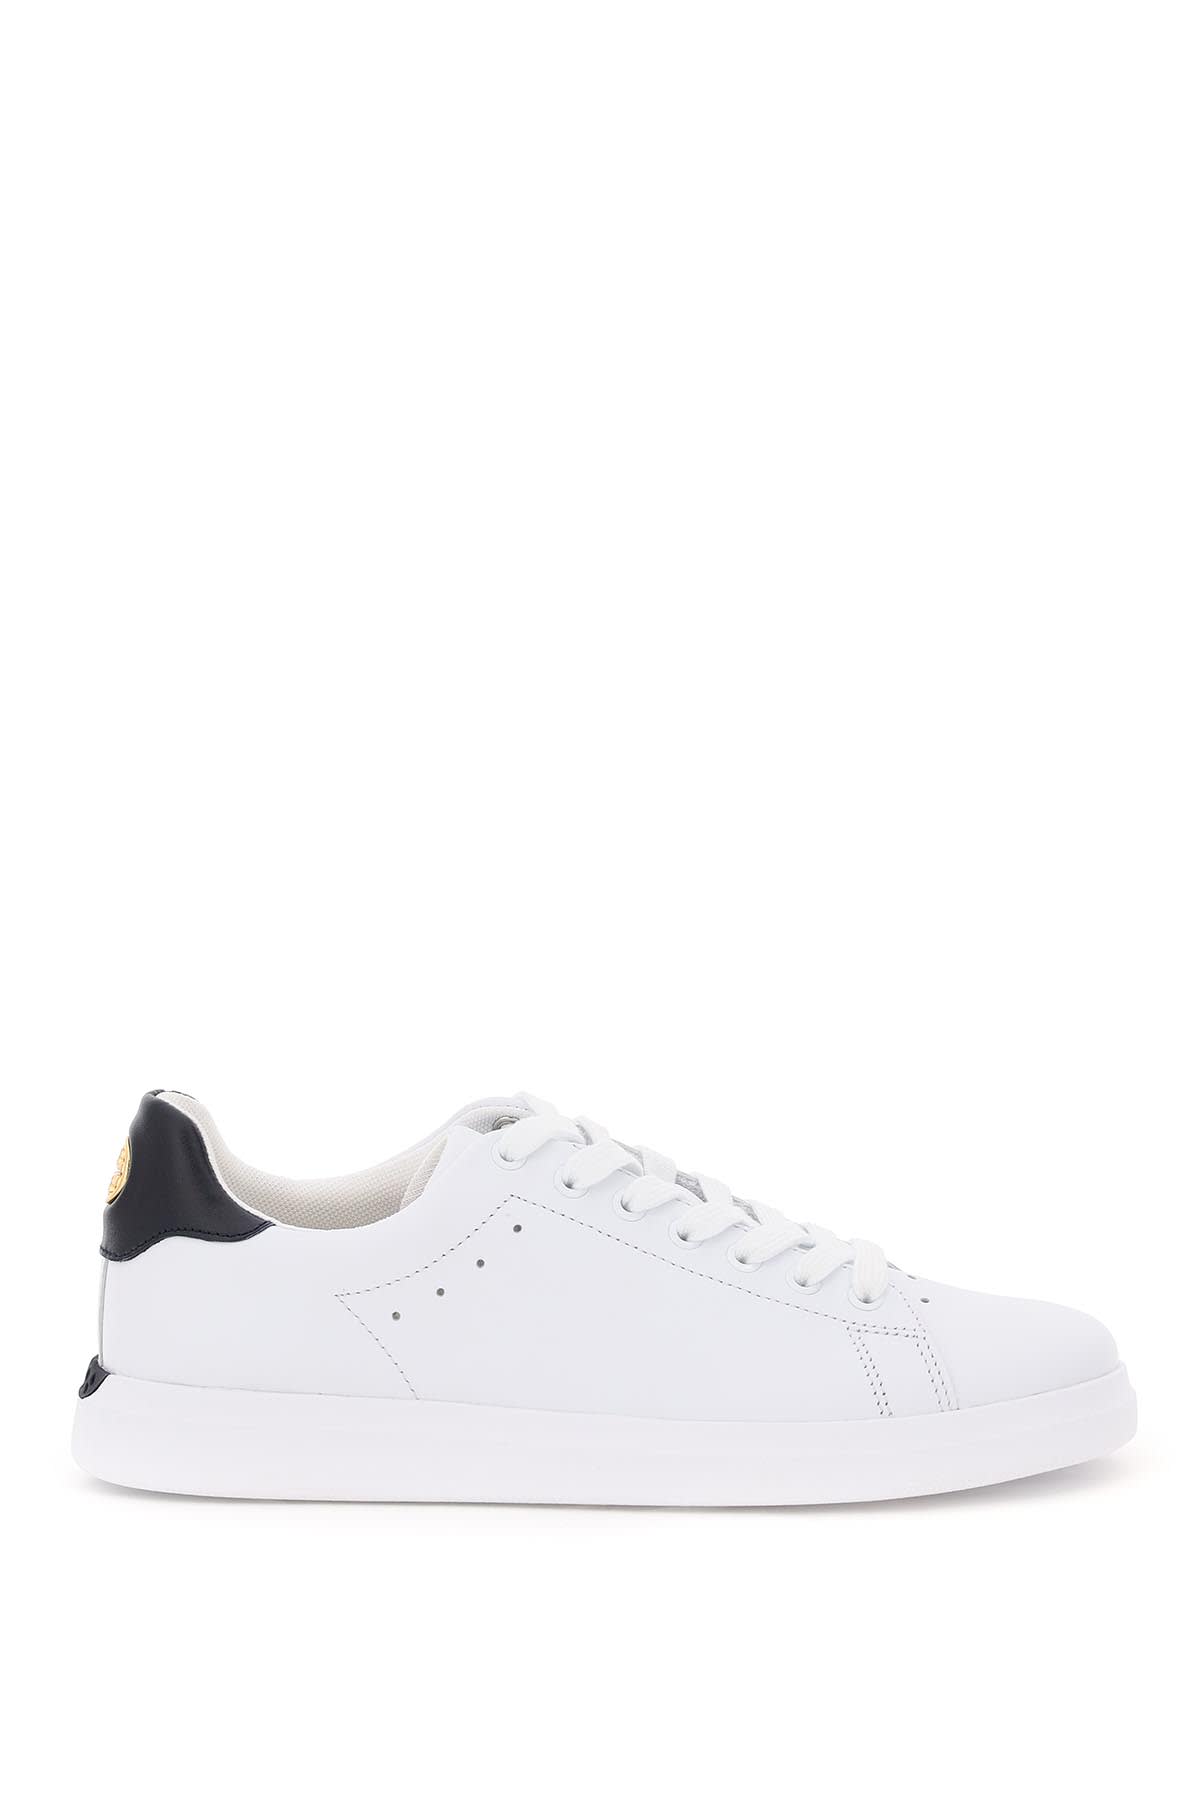 Tory Burch Howell Court Leather Sneakers